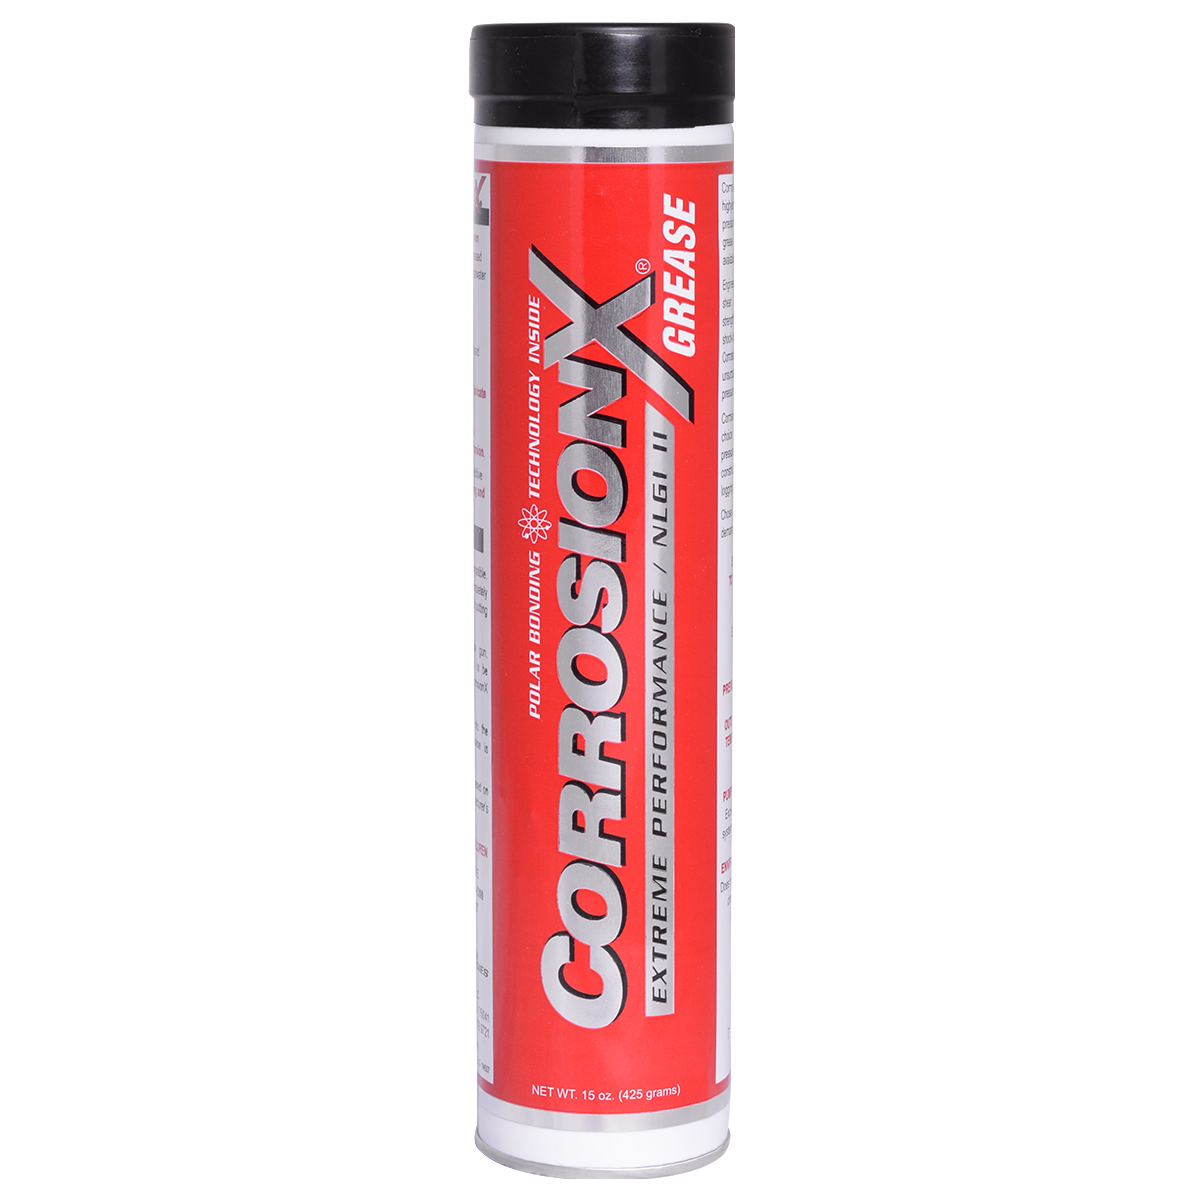 CorrosionX Performance Grease